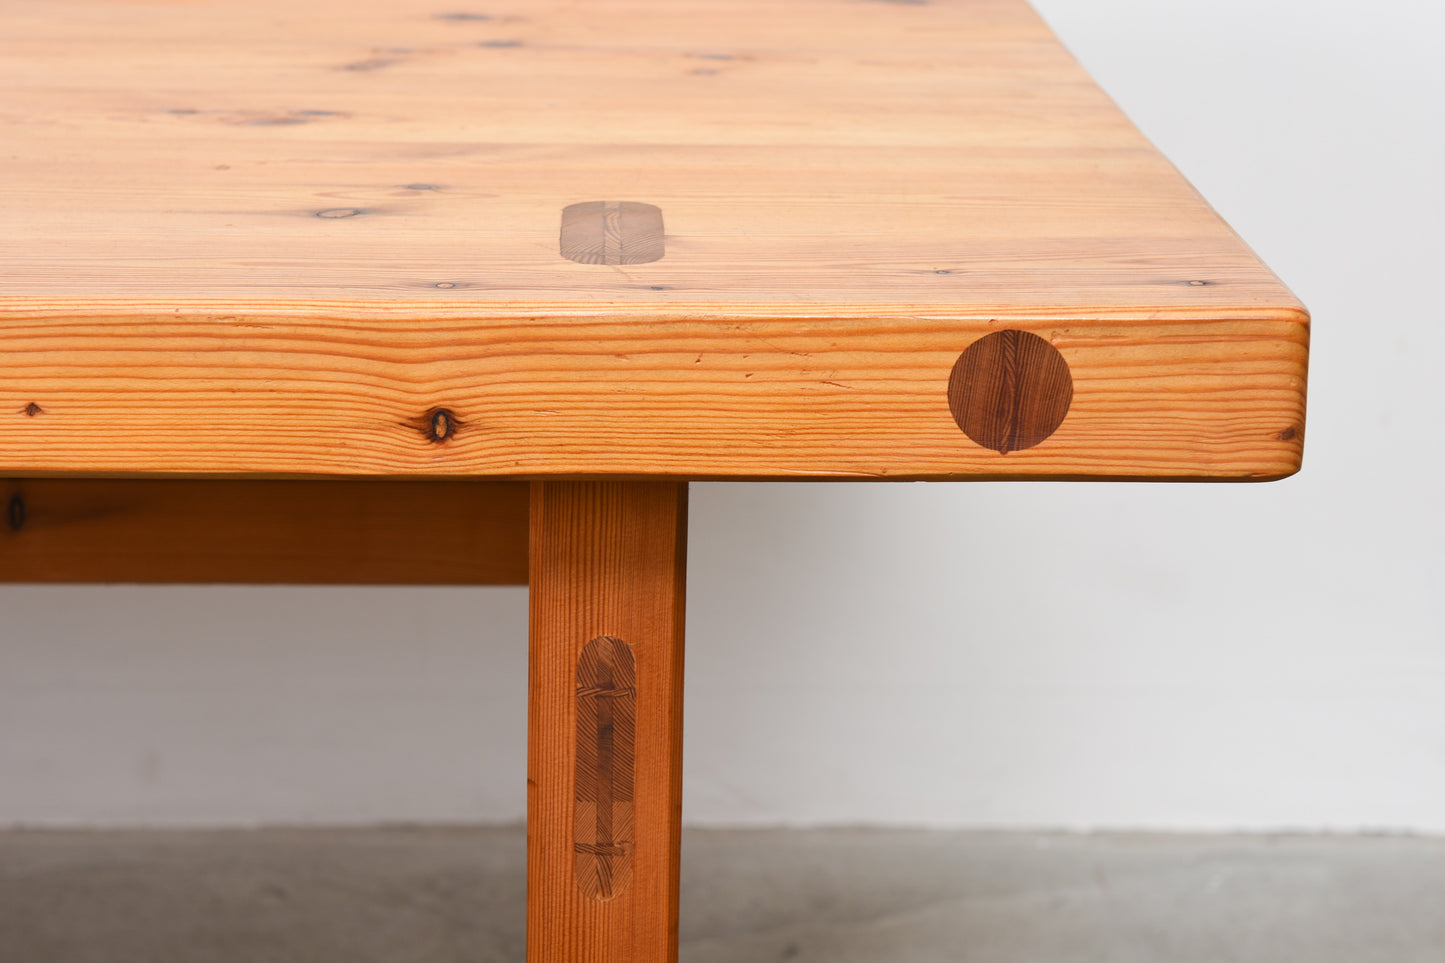 1970s pine dining table by Roland Wilhelmsson